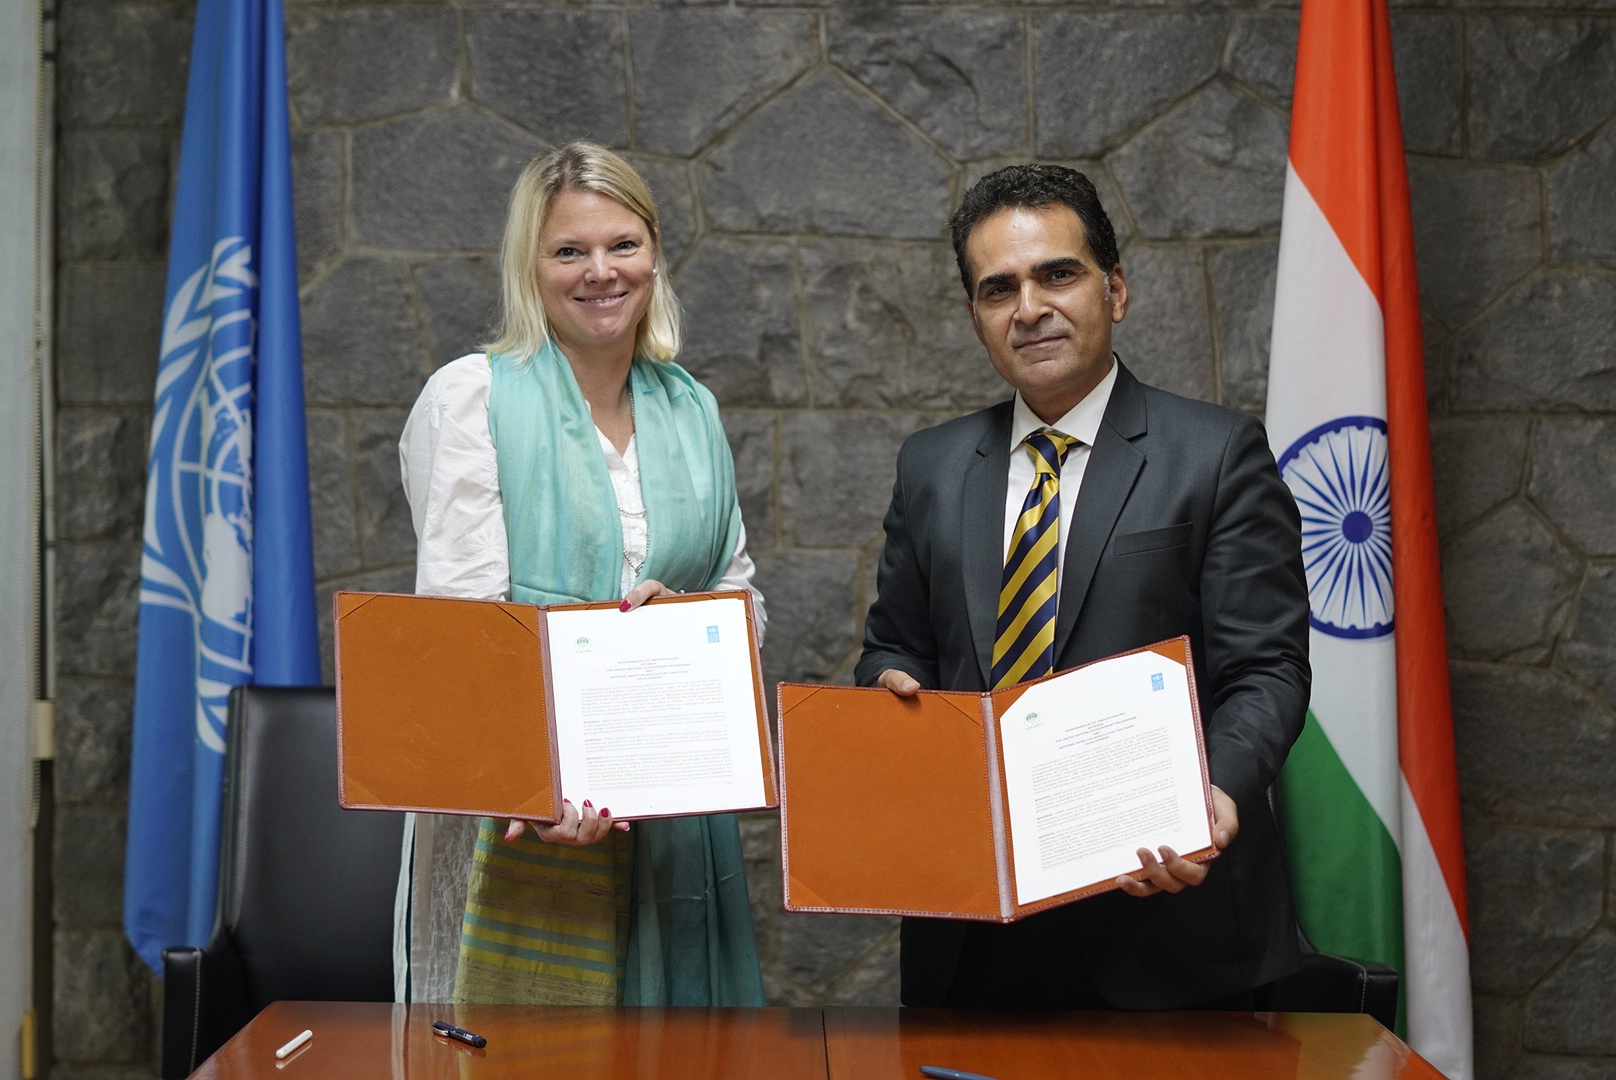 UNDP India partners with NABARD to adopt climate-resilient agriculture practices